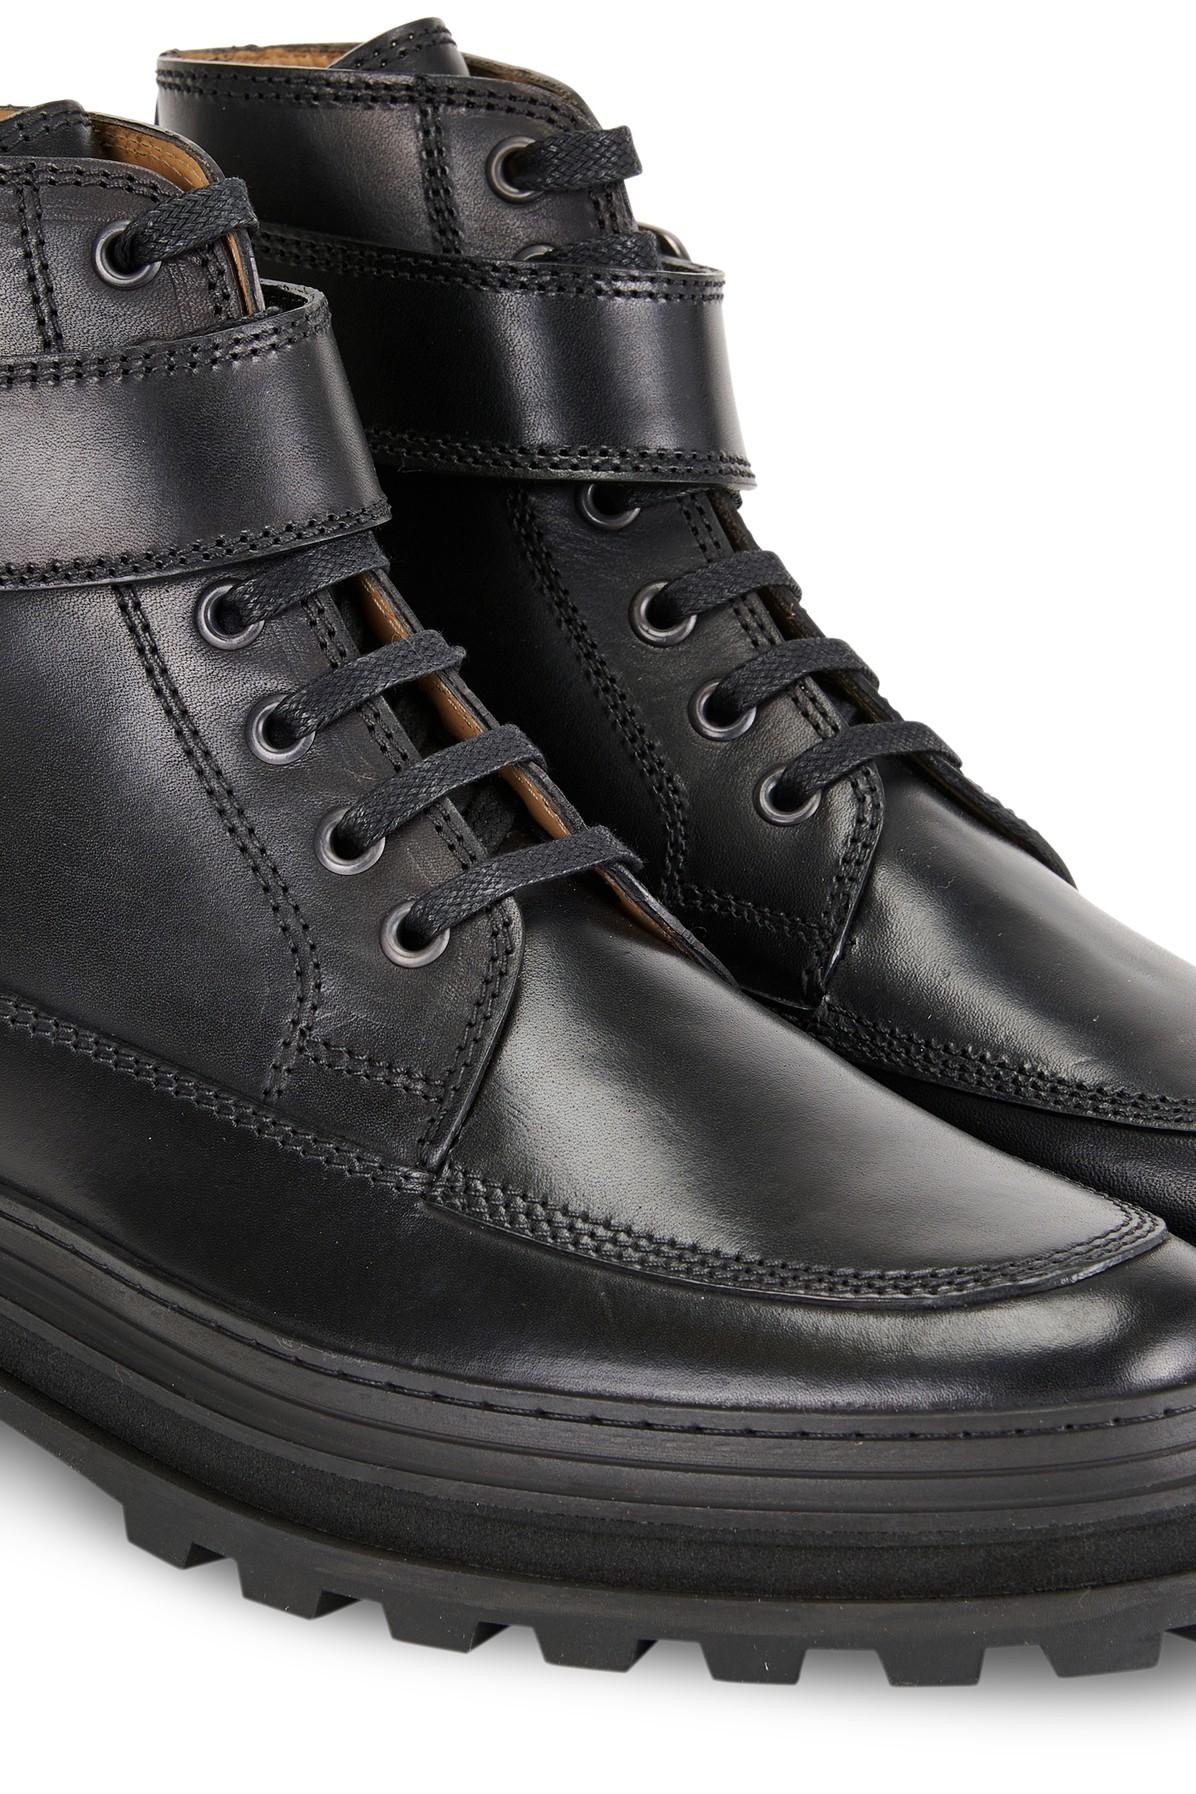 A.P.C. Alix Boots in Black | Lyst